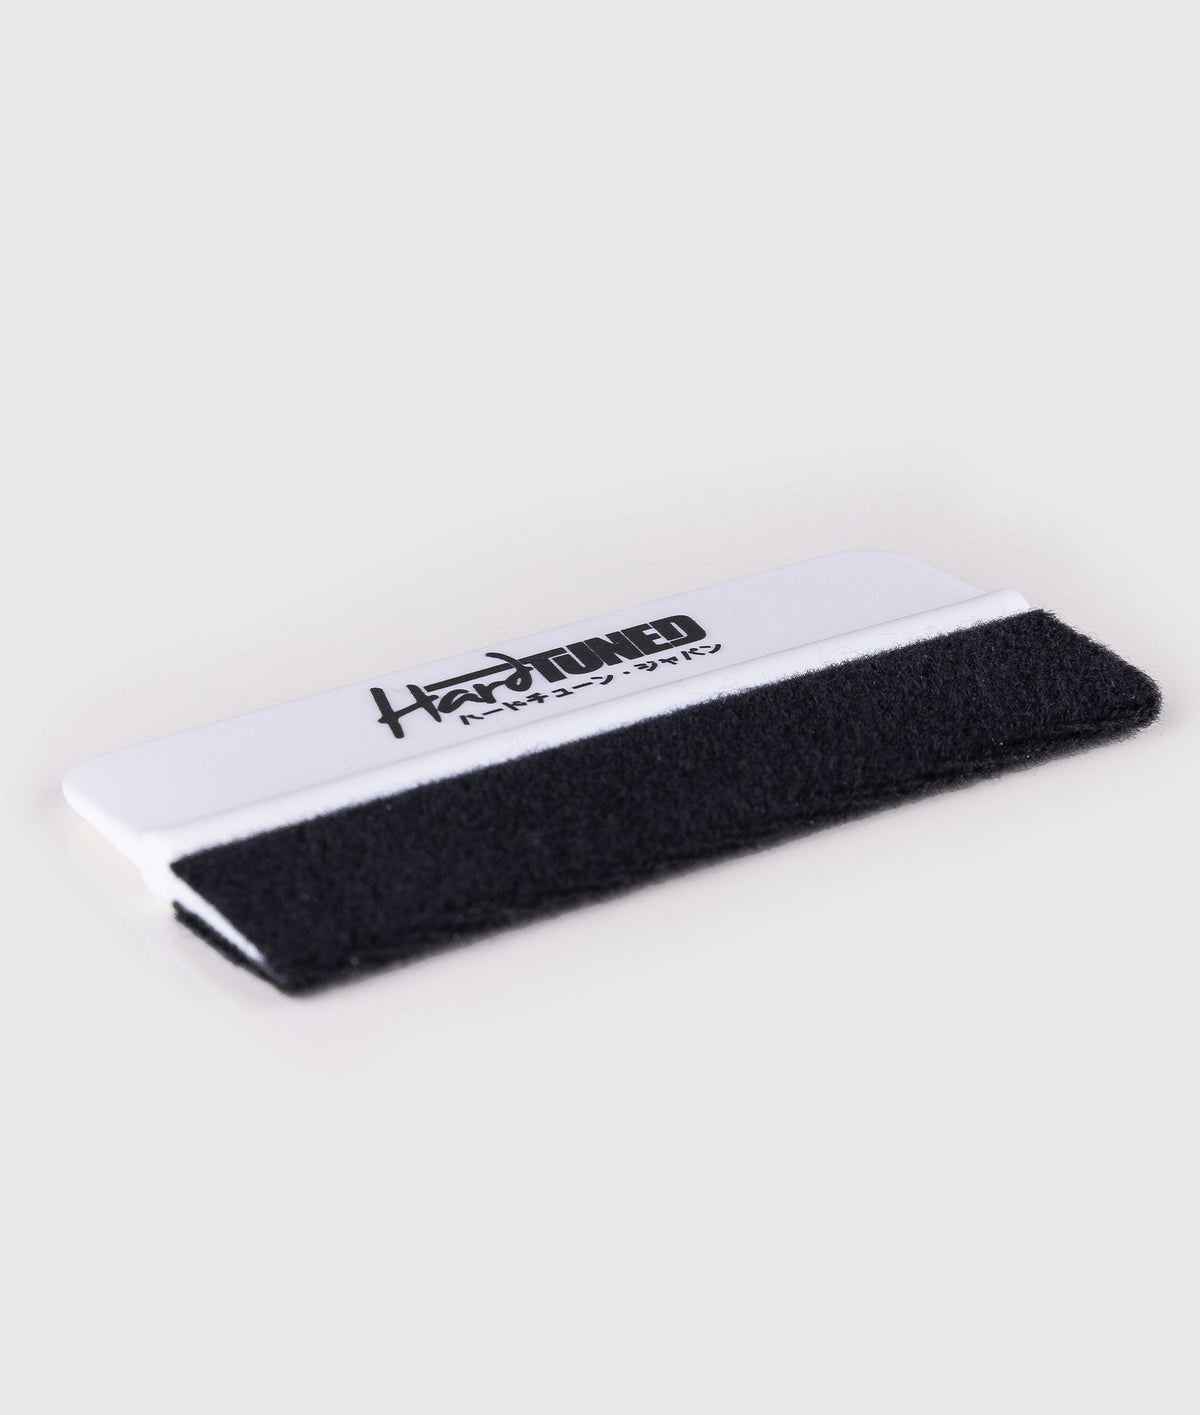 HardTuned Vinyl Application Squeegee - Hardtuned